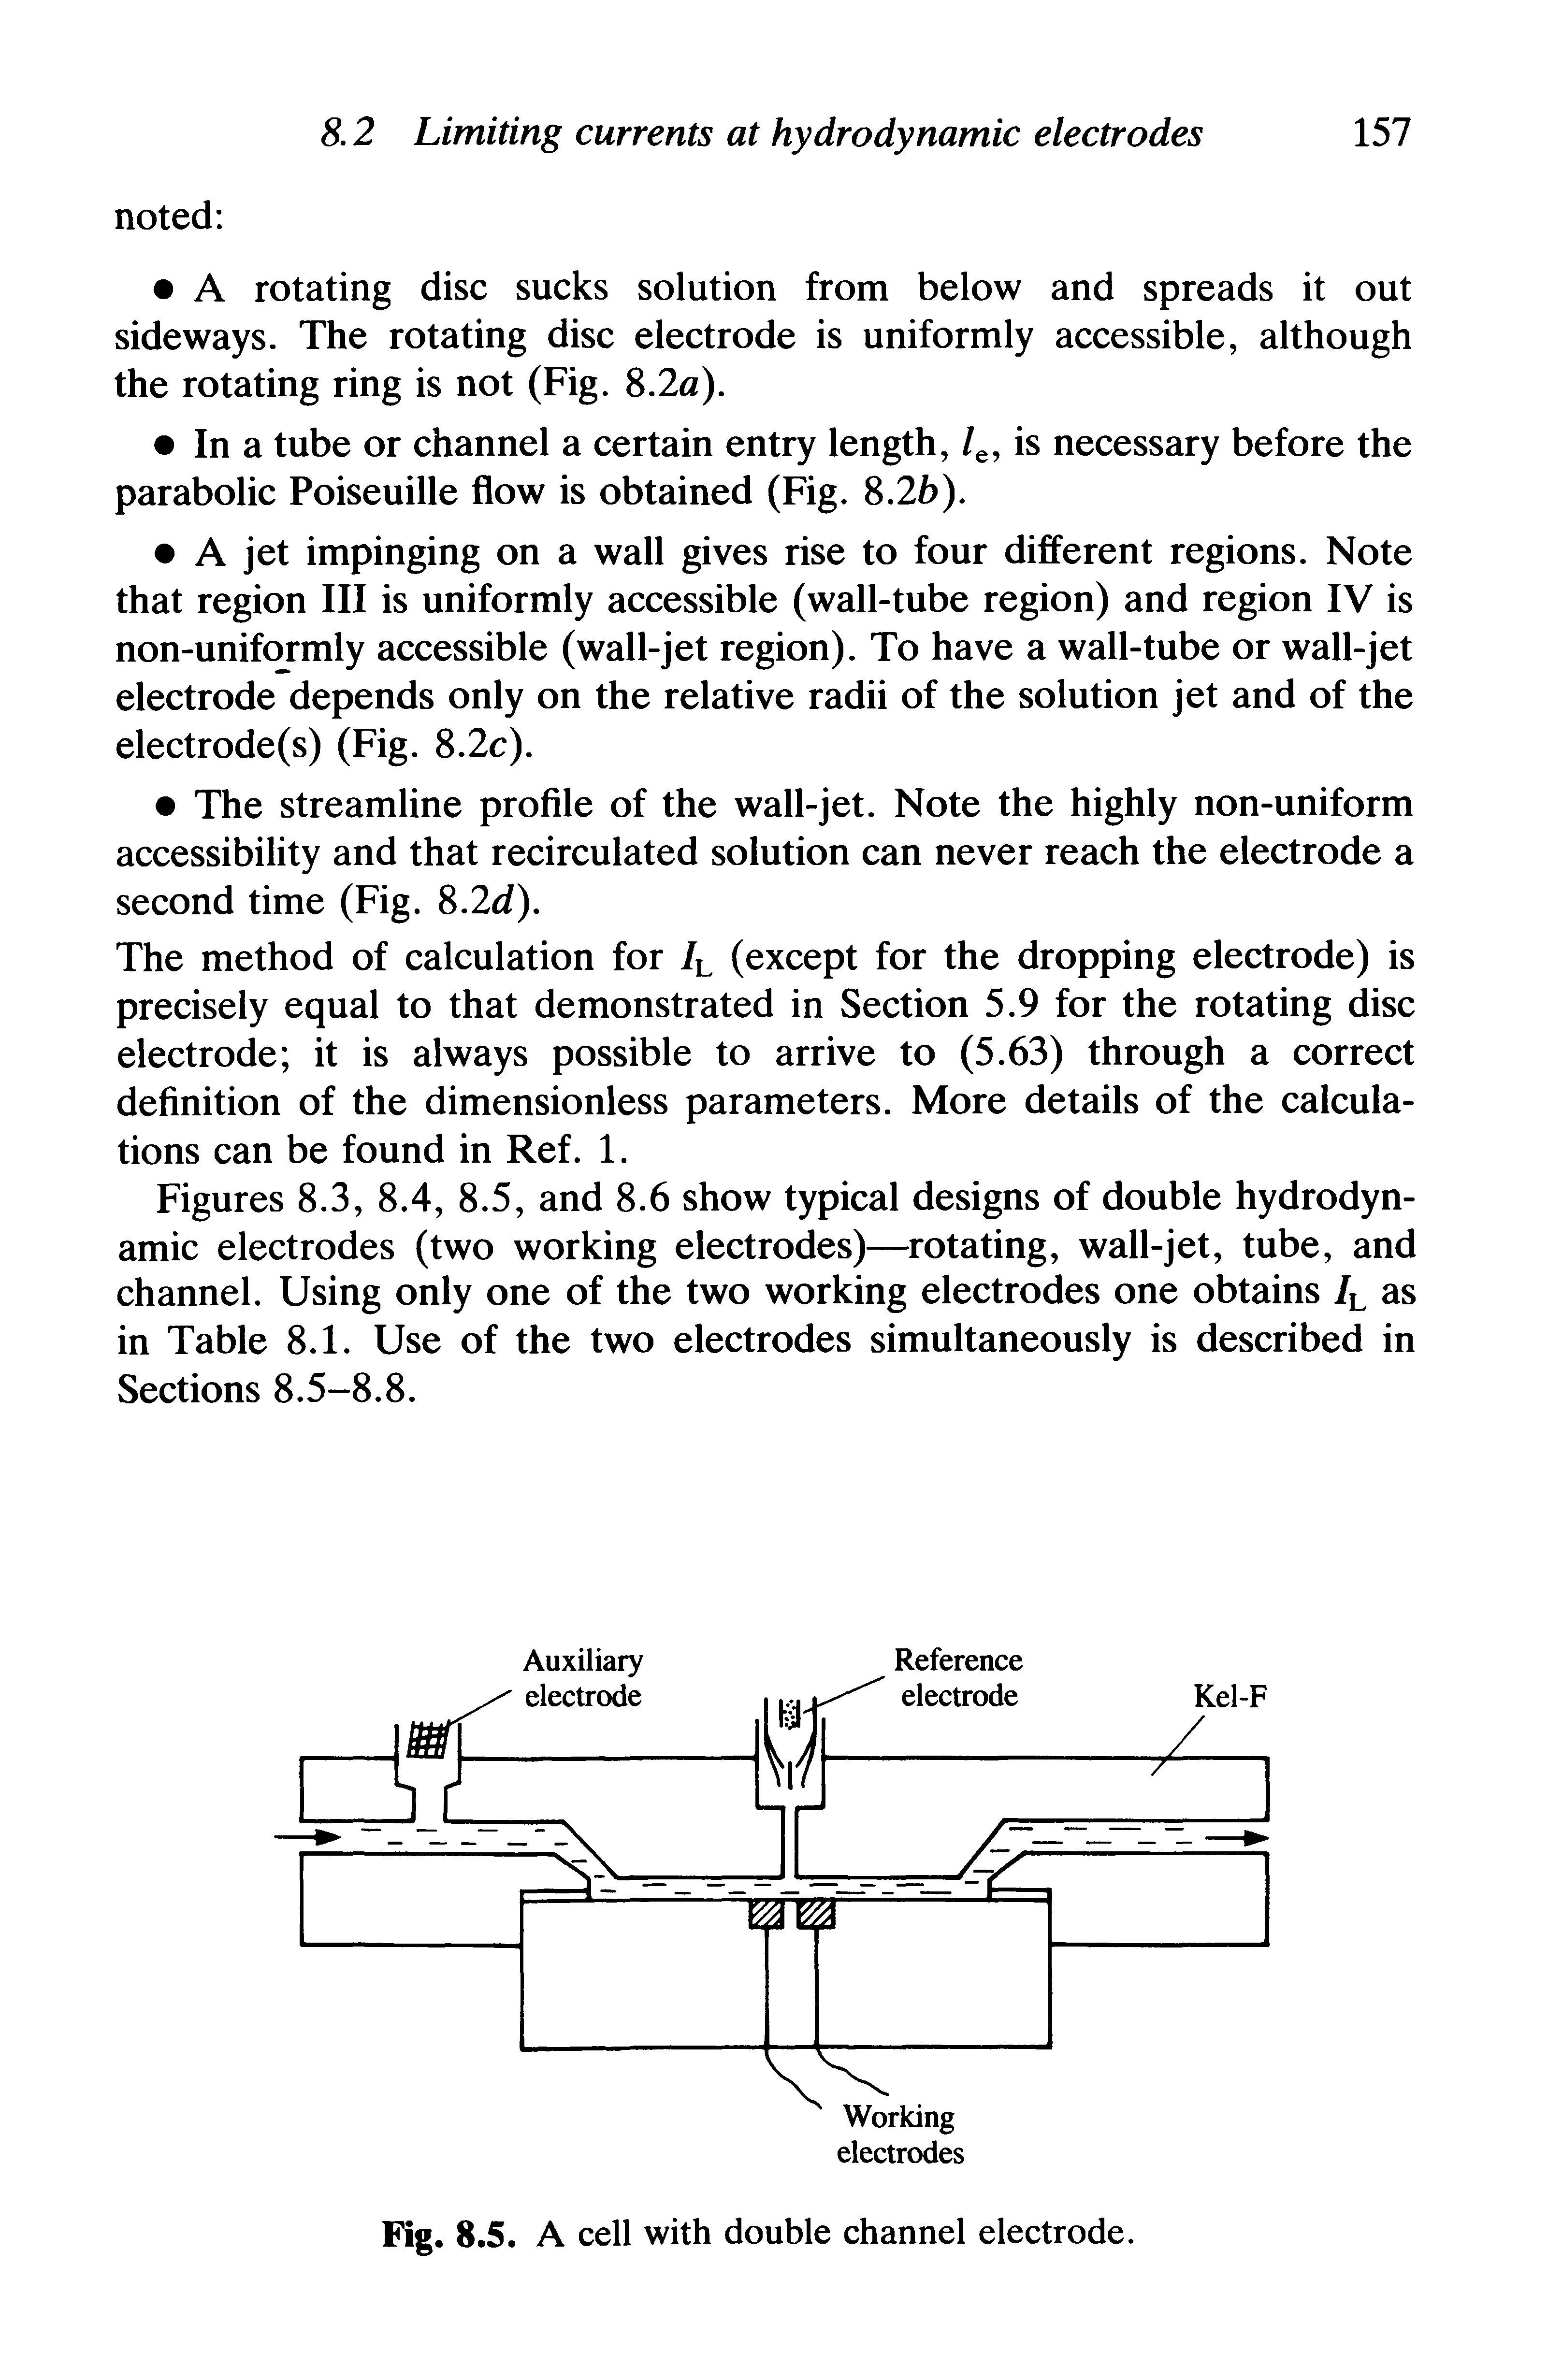 Figures 8.3, 8.4, 8.5, and 8.6 show typical designs of double hydrodynamic electrodes (two working electrodes)—rotating, wall-jet, tube, and channel. Using only one of the two working electrodes one obtains /L as in Table 8.1. Use of the two electrodes simultaneously is described in Sections 8.5-8.8.